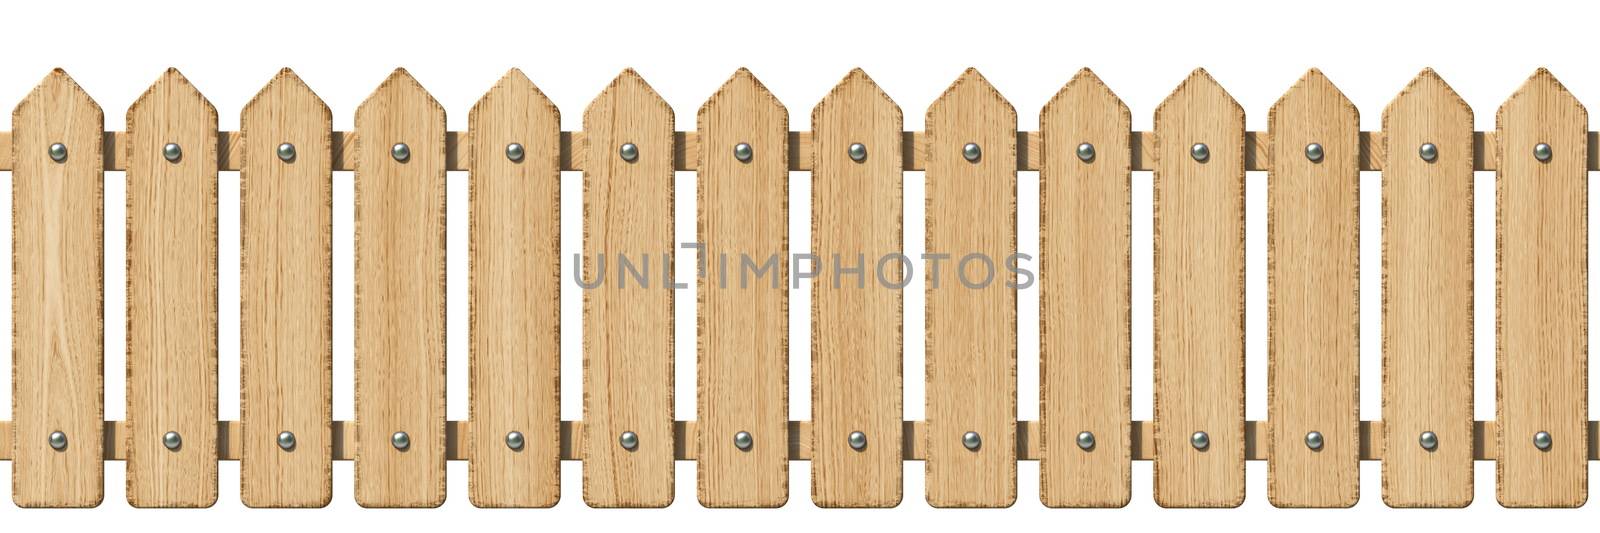 Wooden fence 3D render illustration isolated on white background